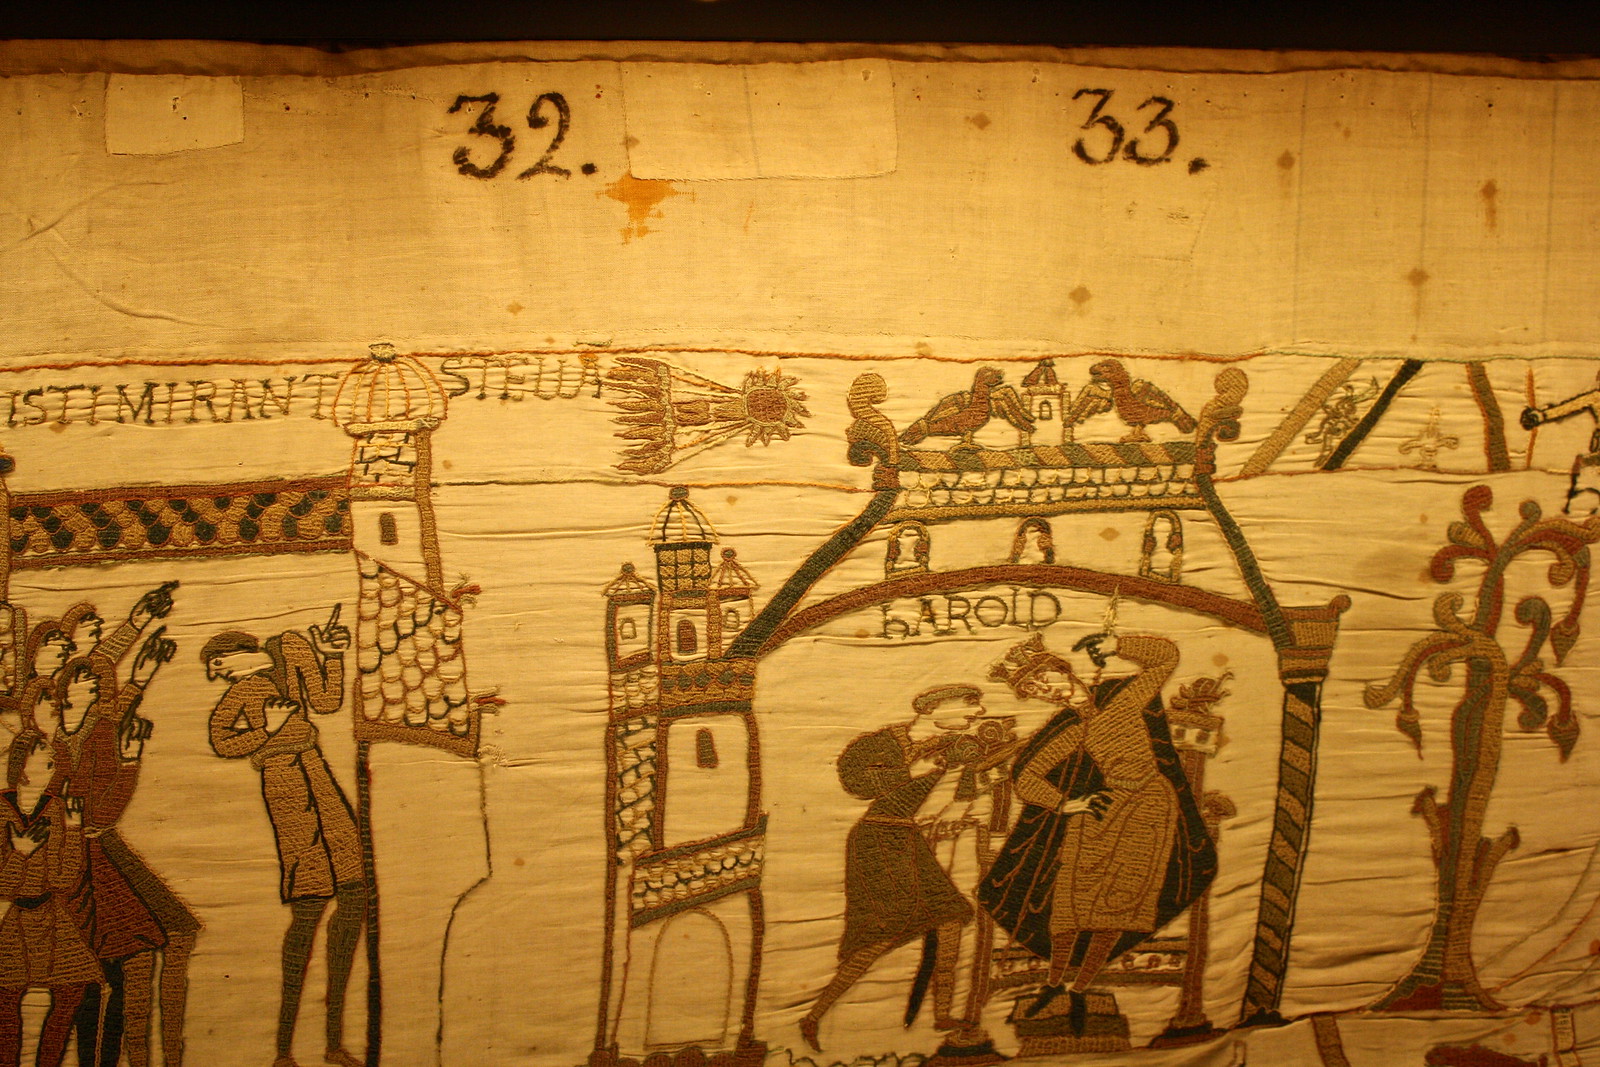 Bayeux Tapestry, France